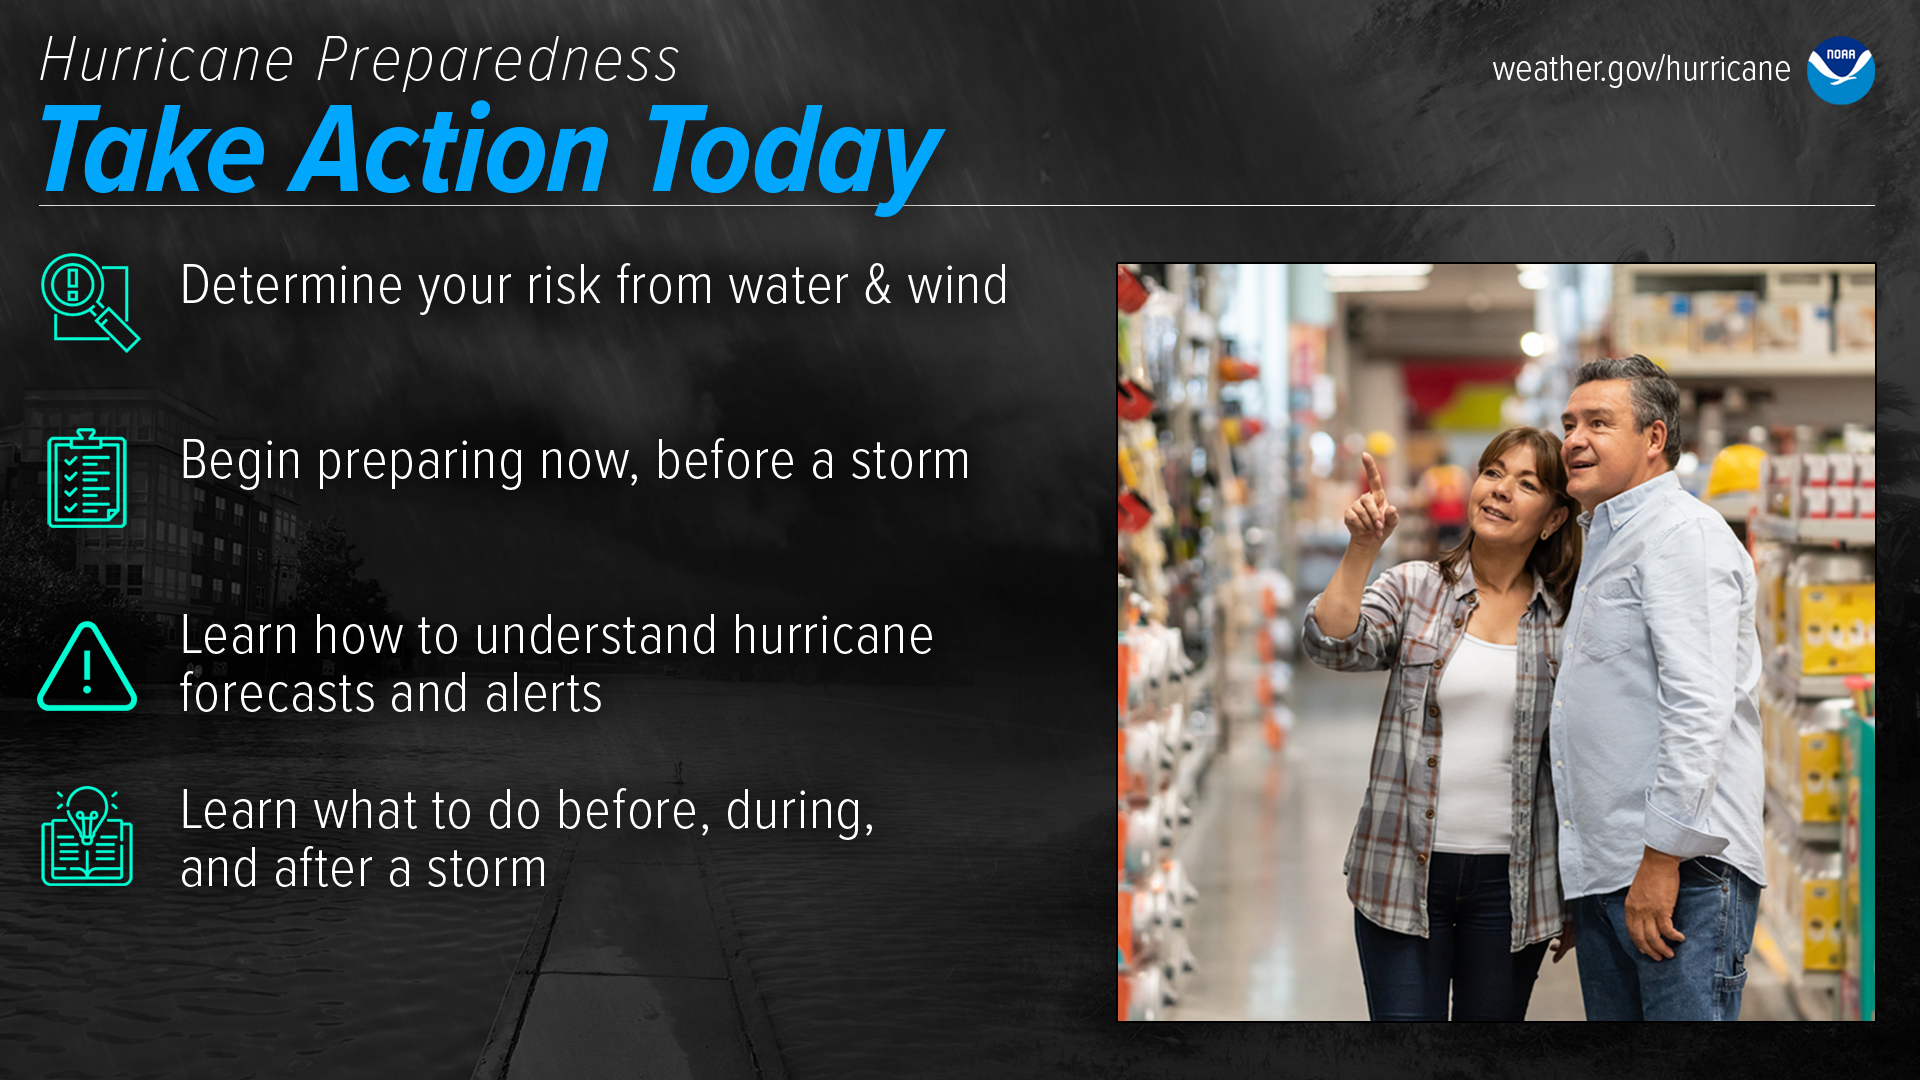 Hurricane Preparedness - Take Action Today. Determine your risk from water and wind. Begin preparing now, before a storm. Learn how to understand hurricane forecasts and alerts. Learn what to do before, during, and after a storm.